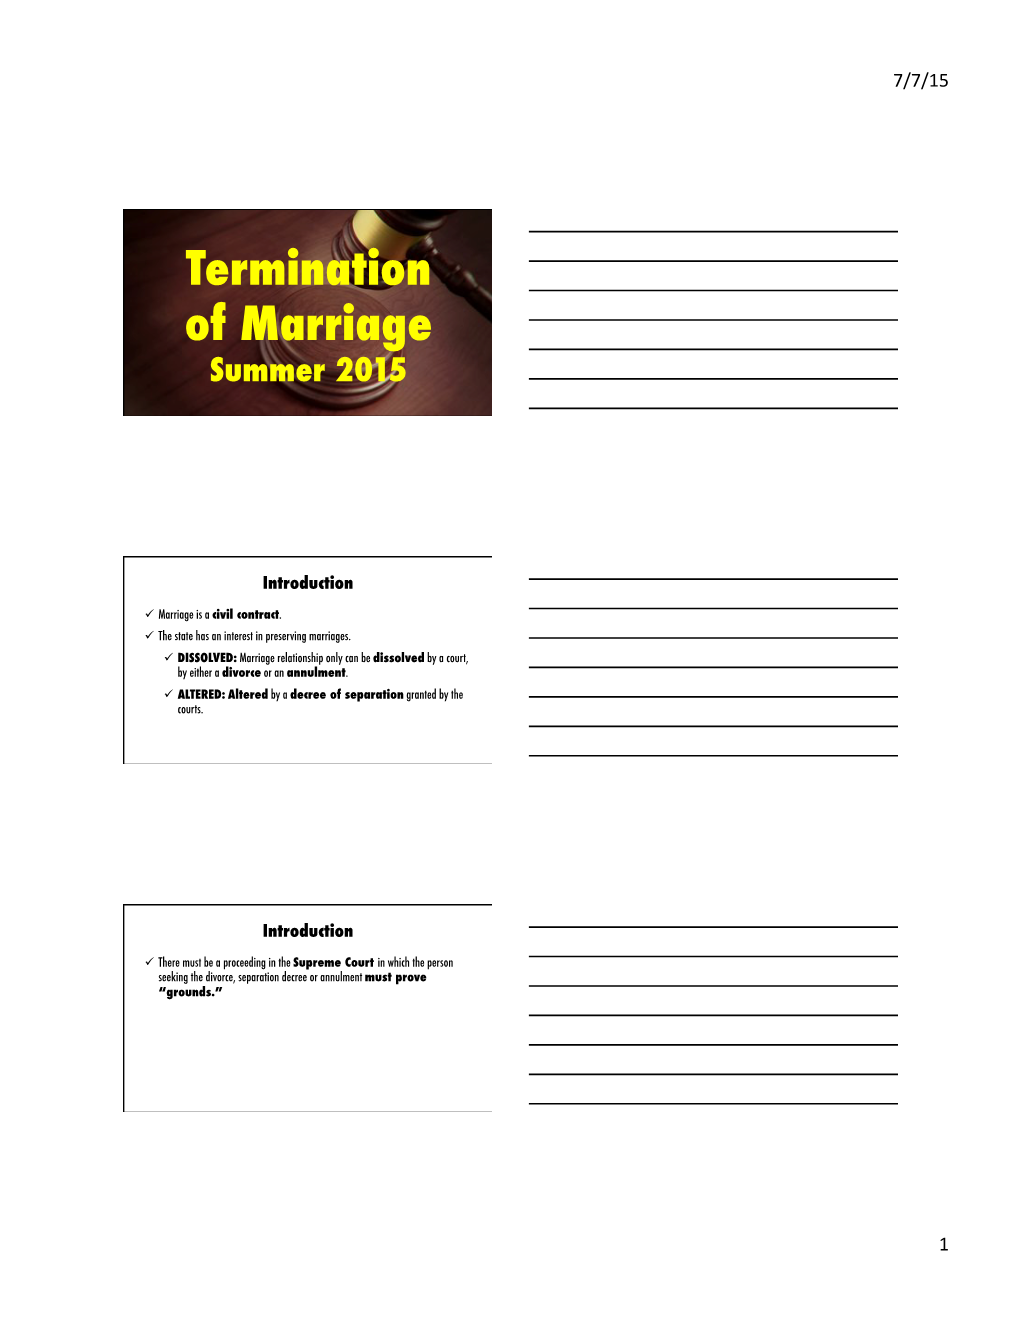 Termination of Marriage in New York.Pptx